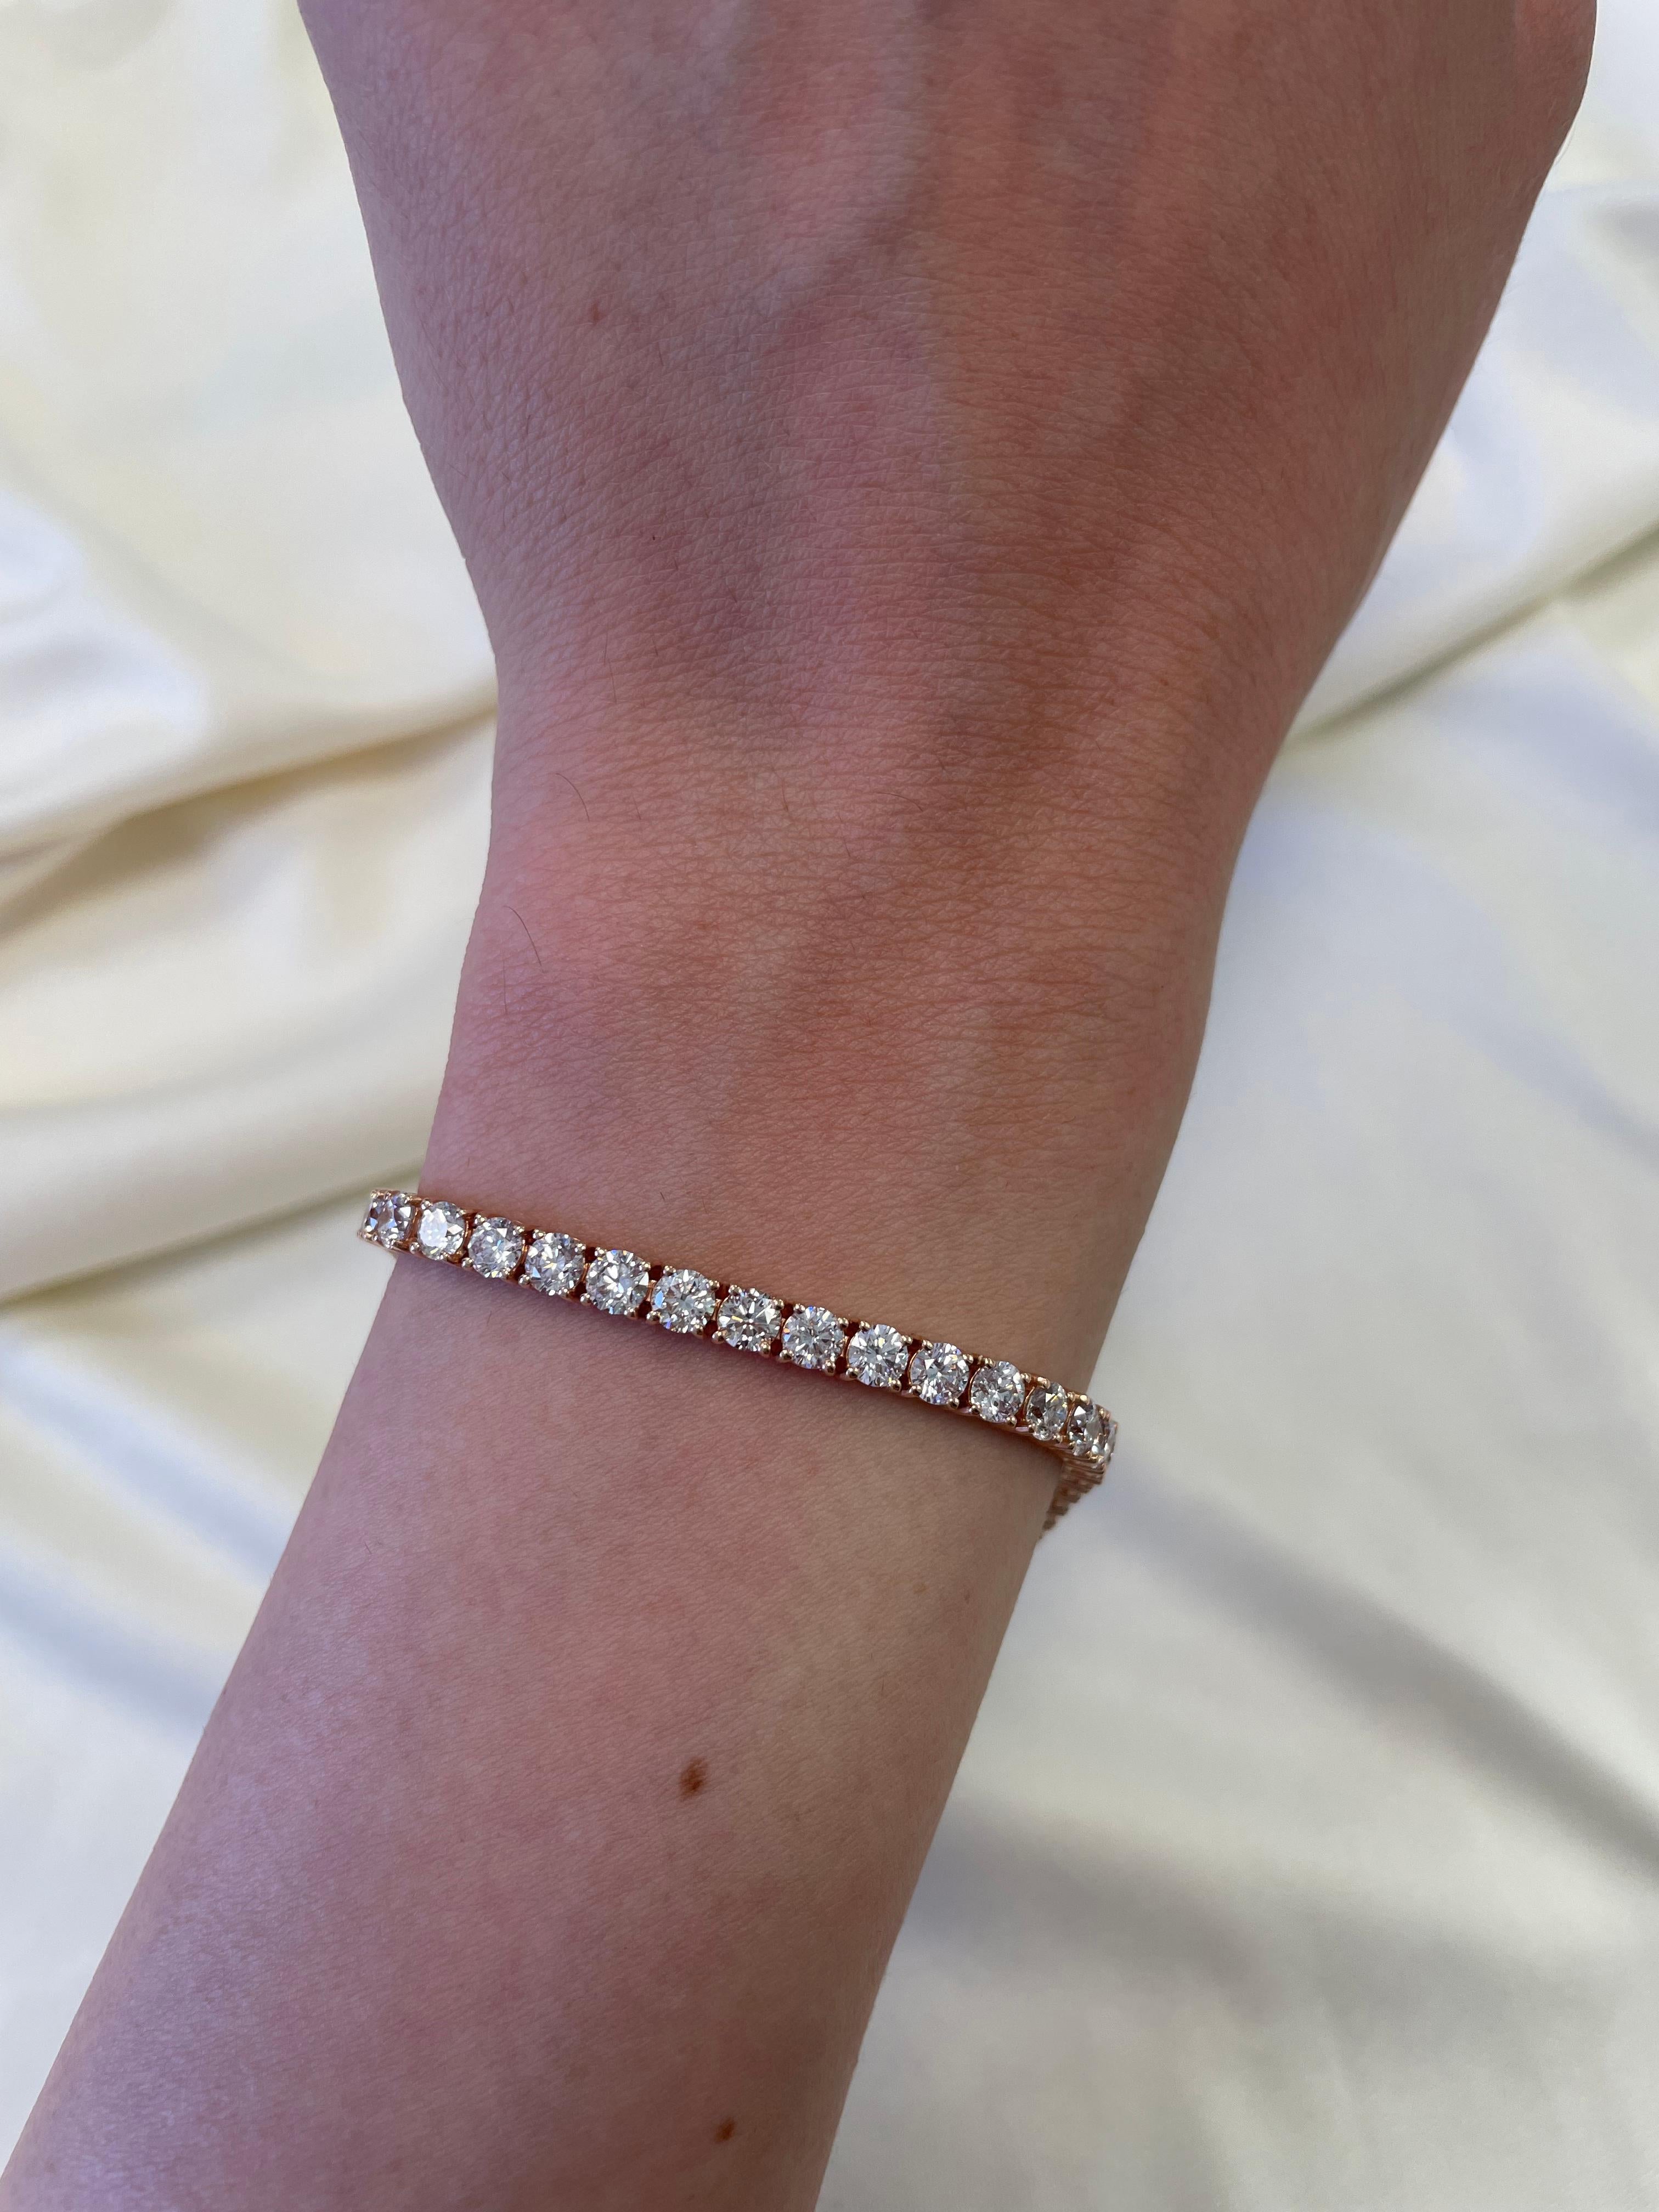 Exquisite and timeless diamonds tennis bracelet, by Alexander Beverly Hills.
45 round brilliant diamonds, 9.10 carats total. Approximately F/G color and VS2/SI1 clarity. Four prong set in 14k rose gold, 11.74 grams, 7 inches. 
Accommodated with an